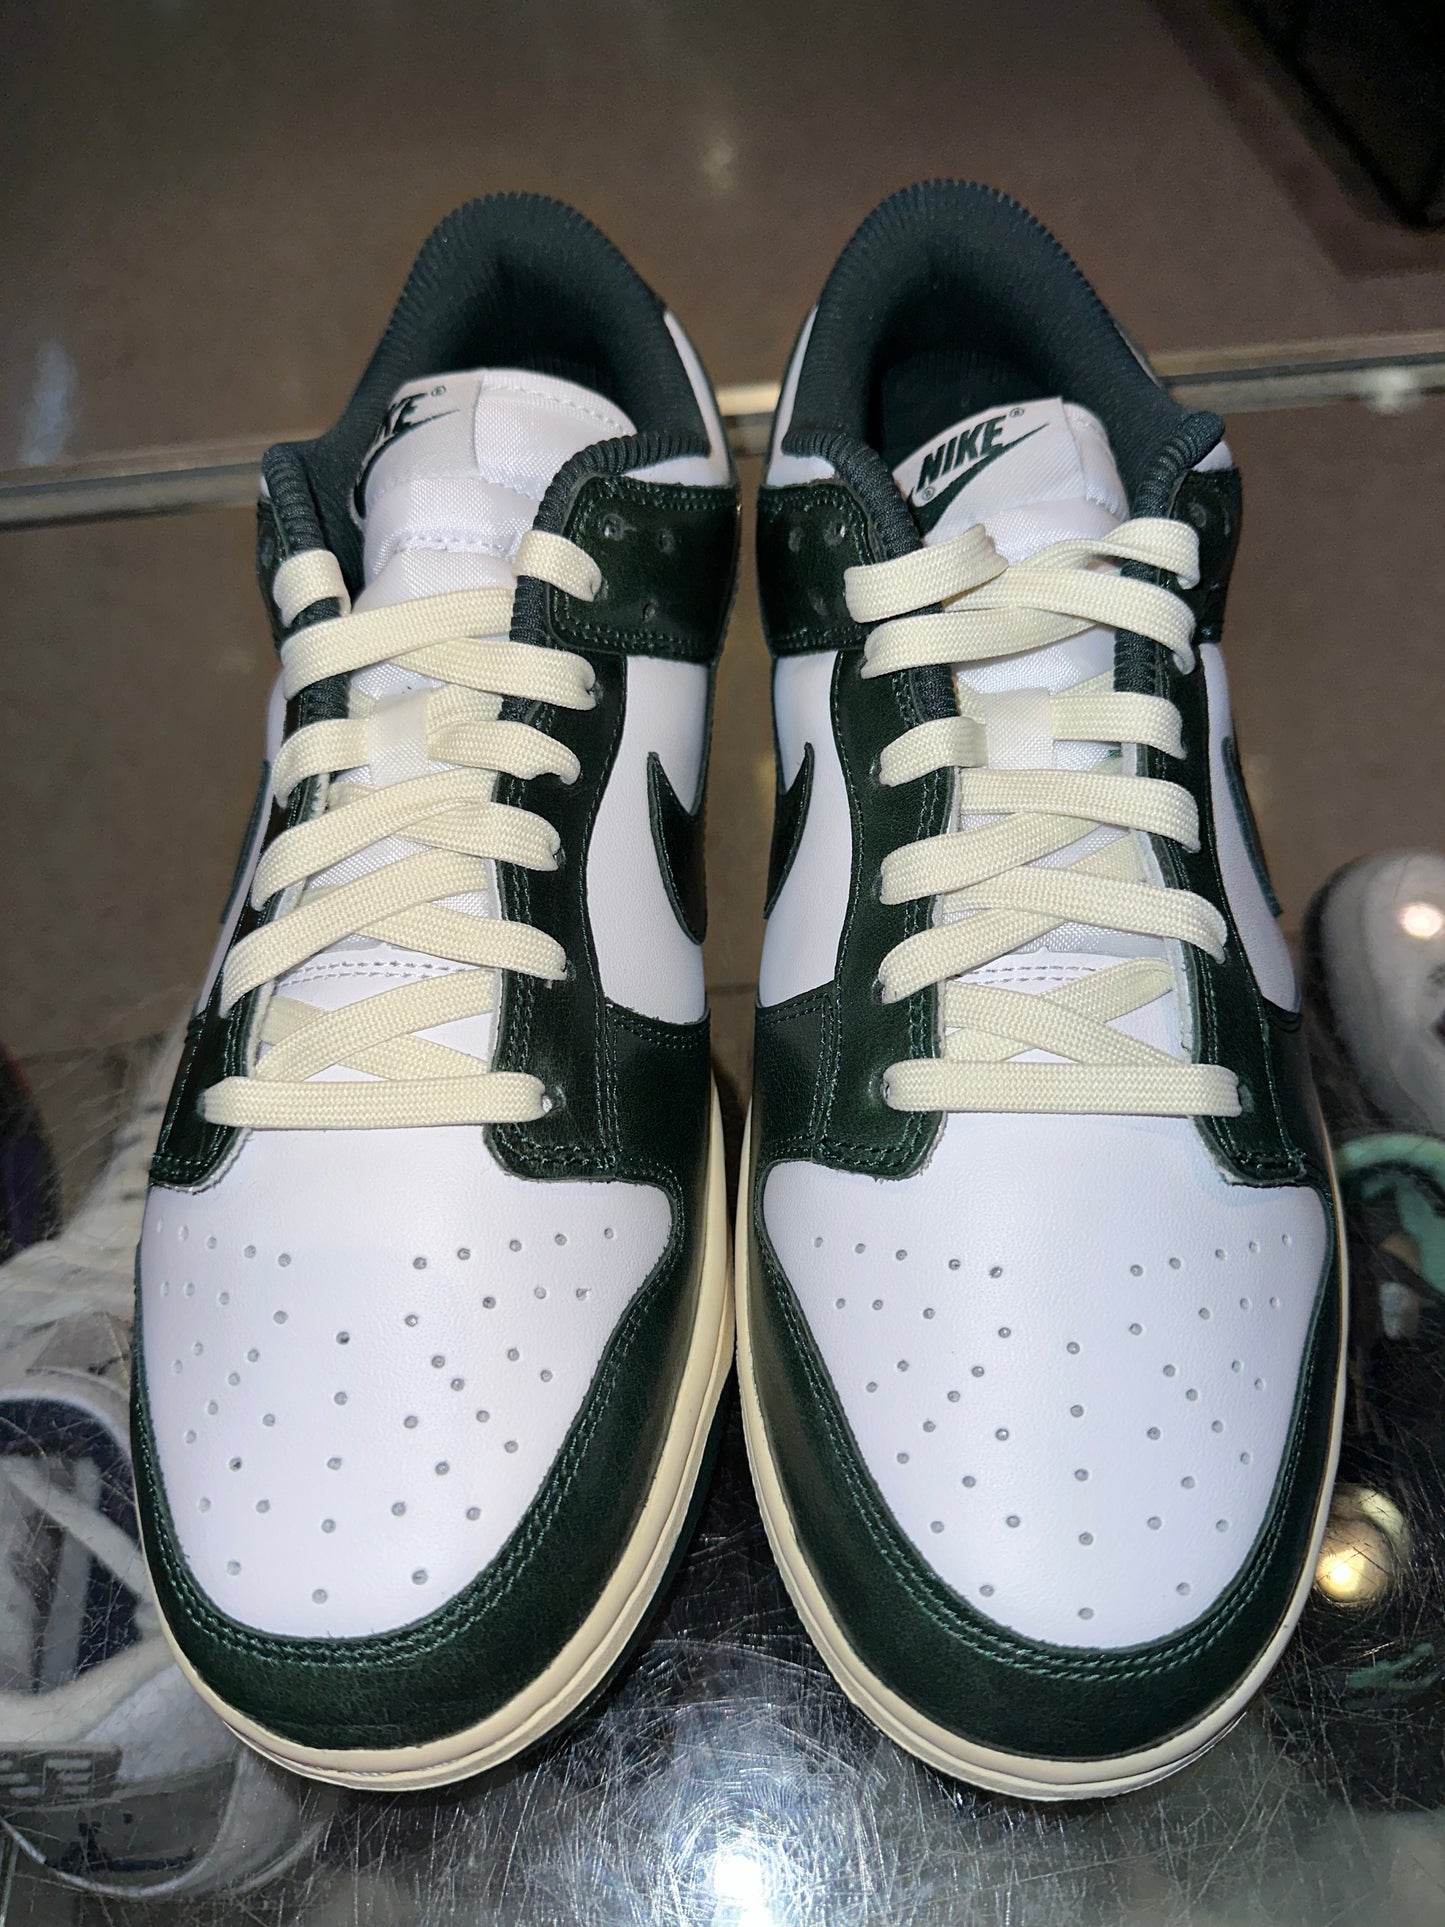 Size 10 (11.5W) Dunk Low “Vintage Green” Brand New (Mall)